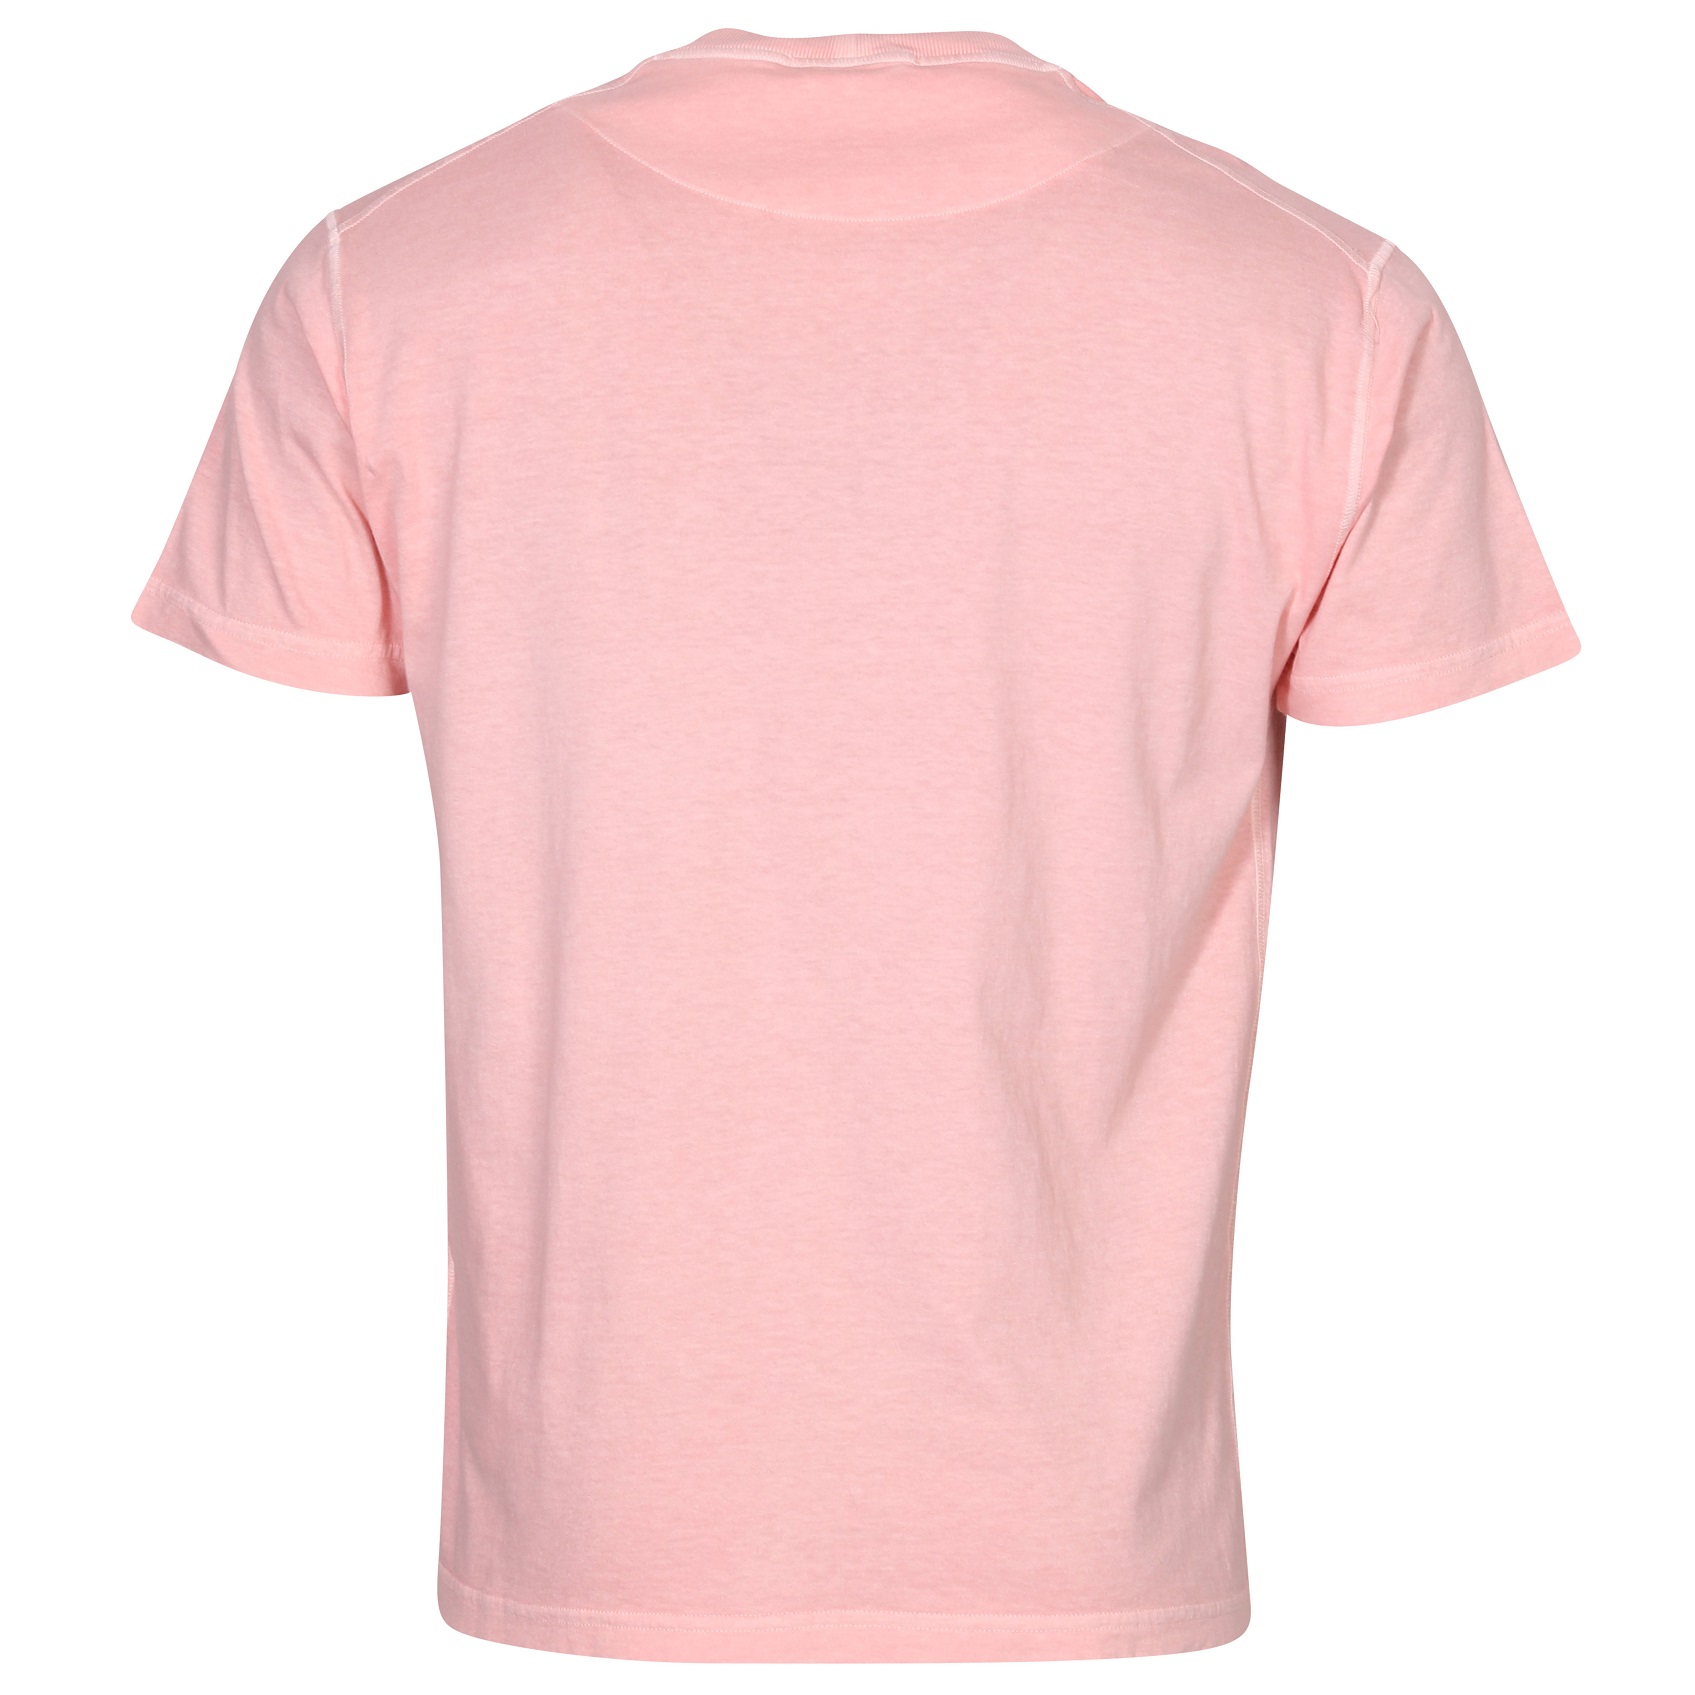 STONE ISLAND Pocket T-Shirt in Washed Pink M